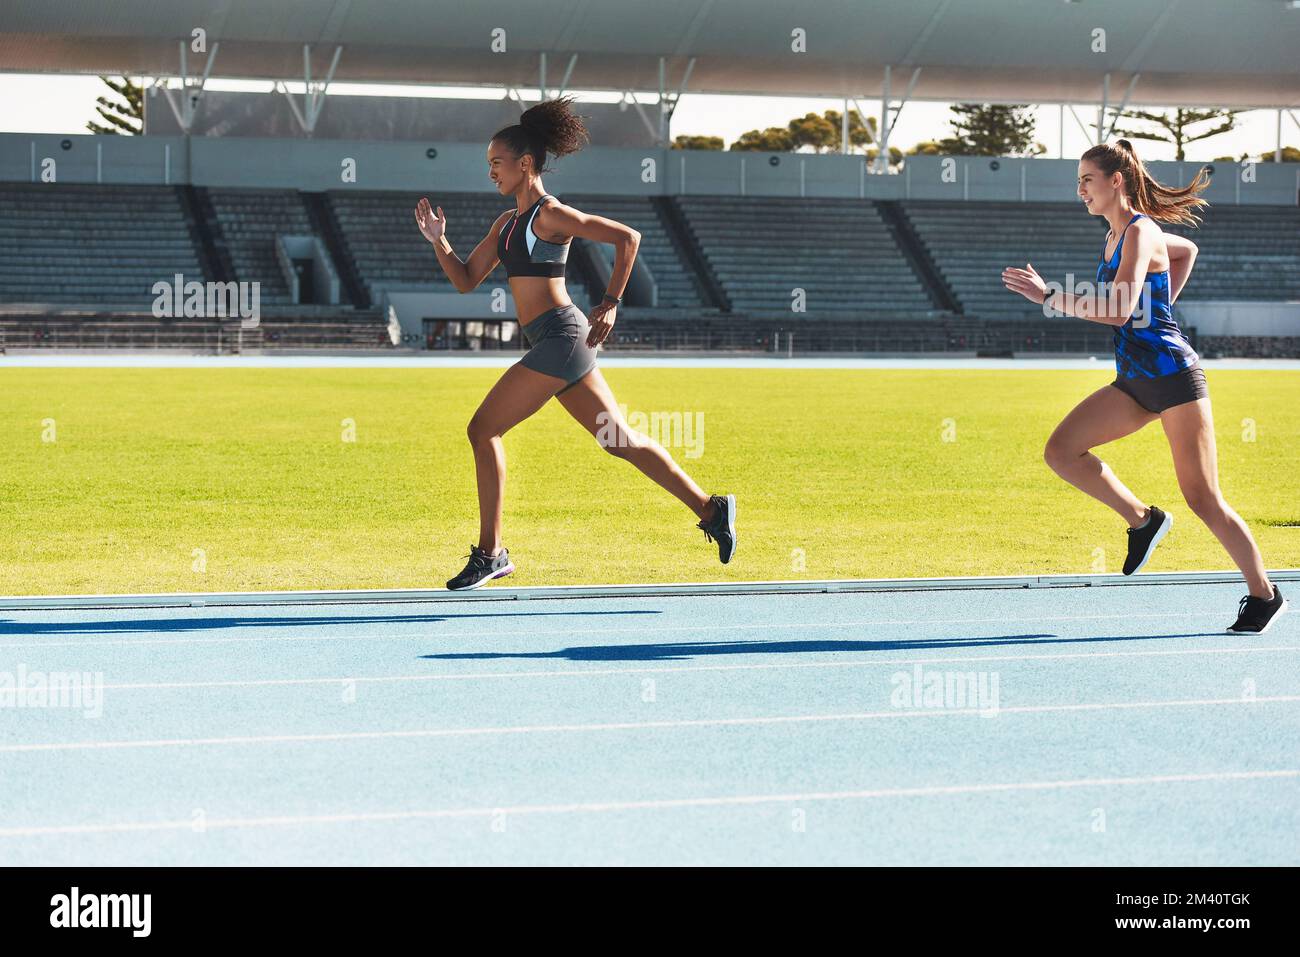 Catching up. Full length shot of two attractive young female athletes running along the track. Stock Photo